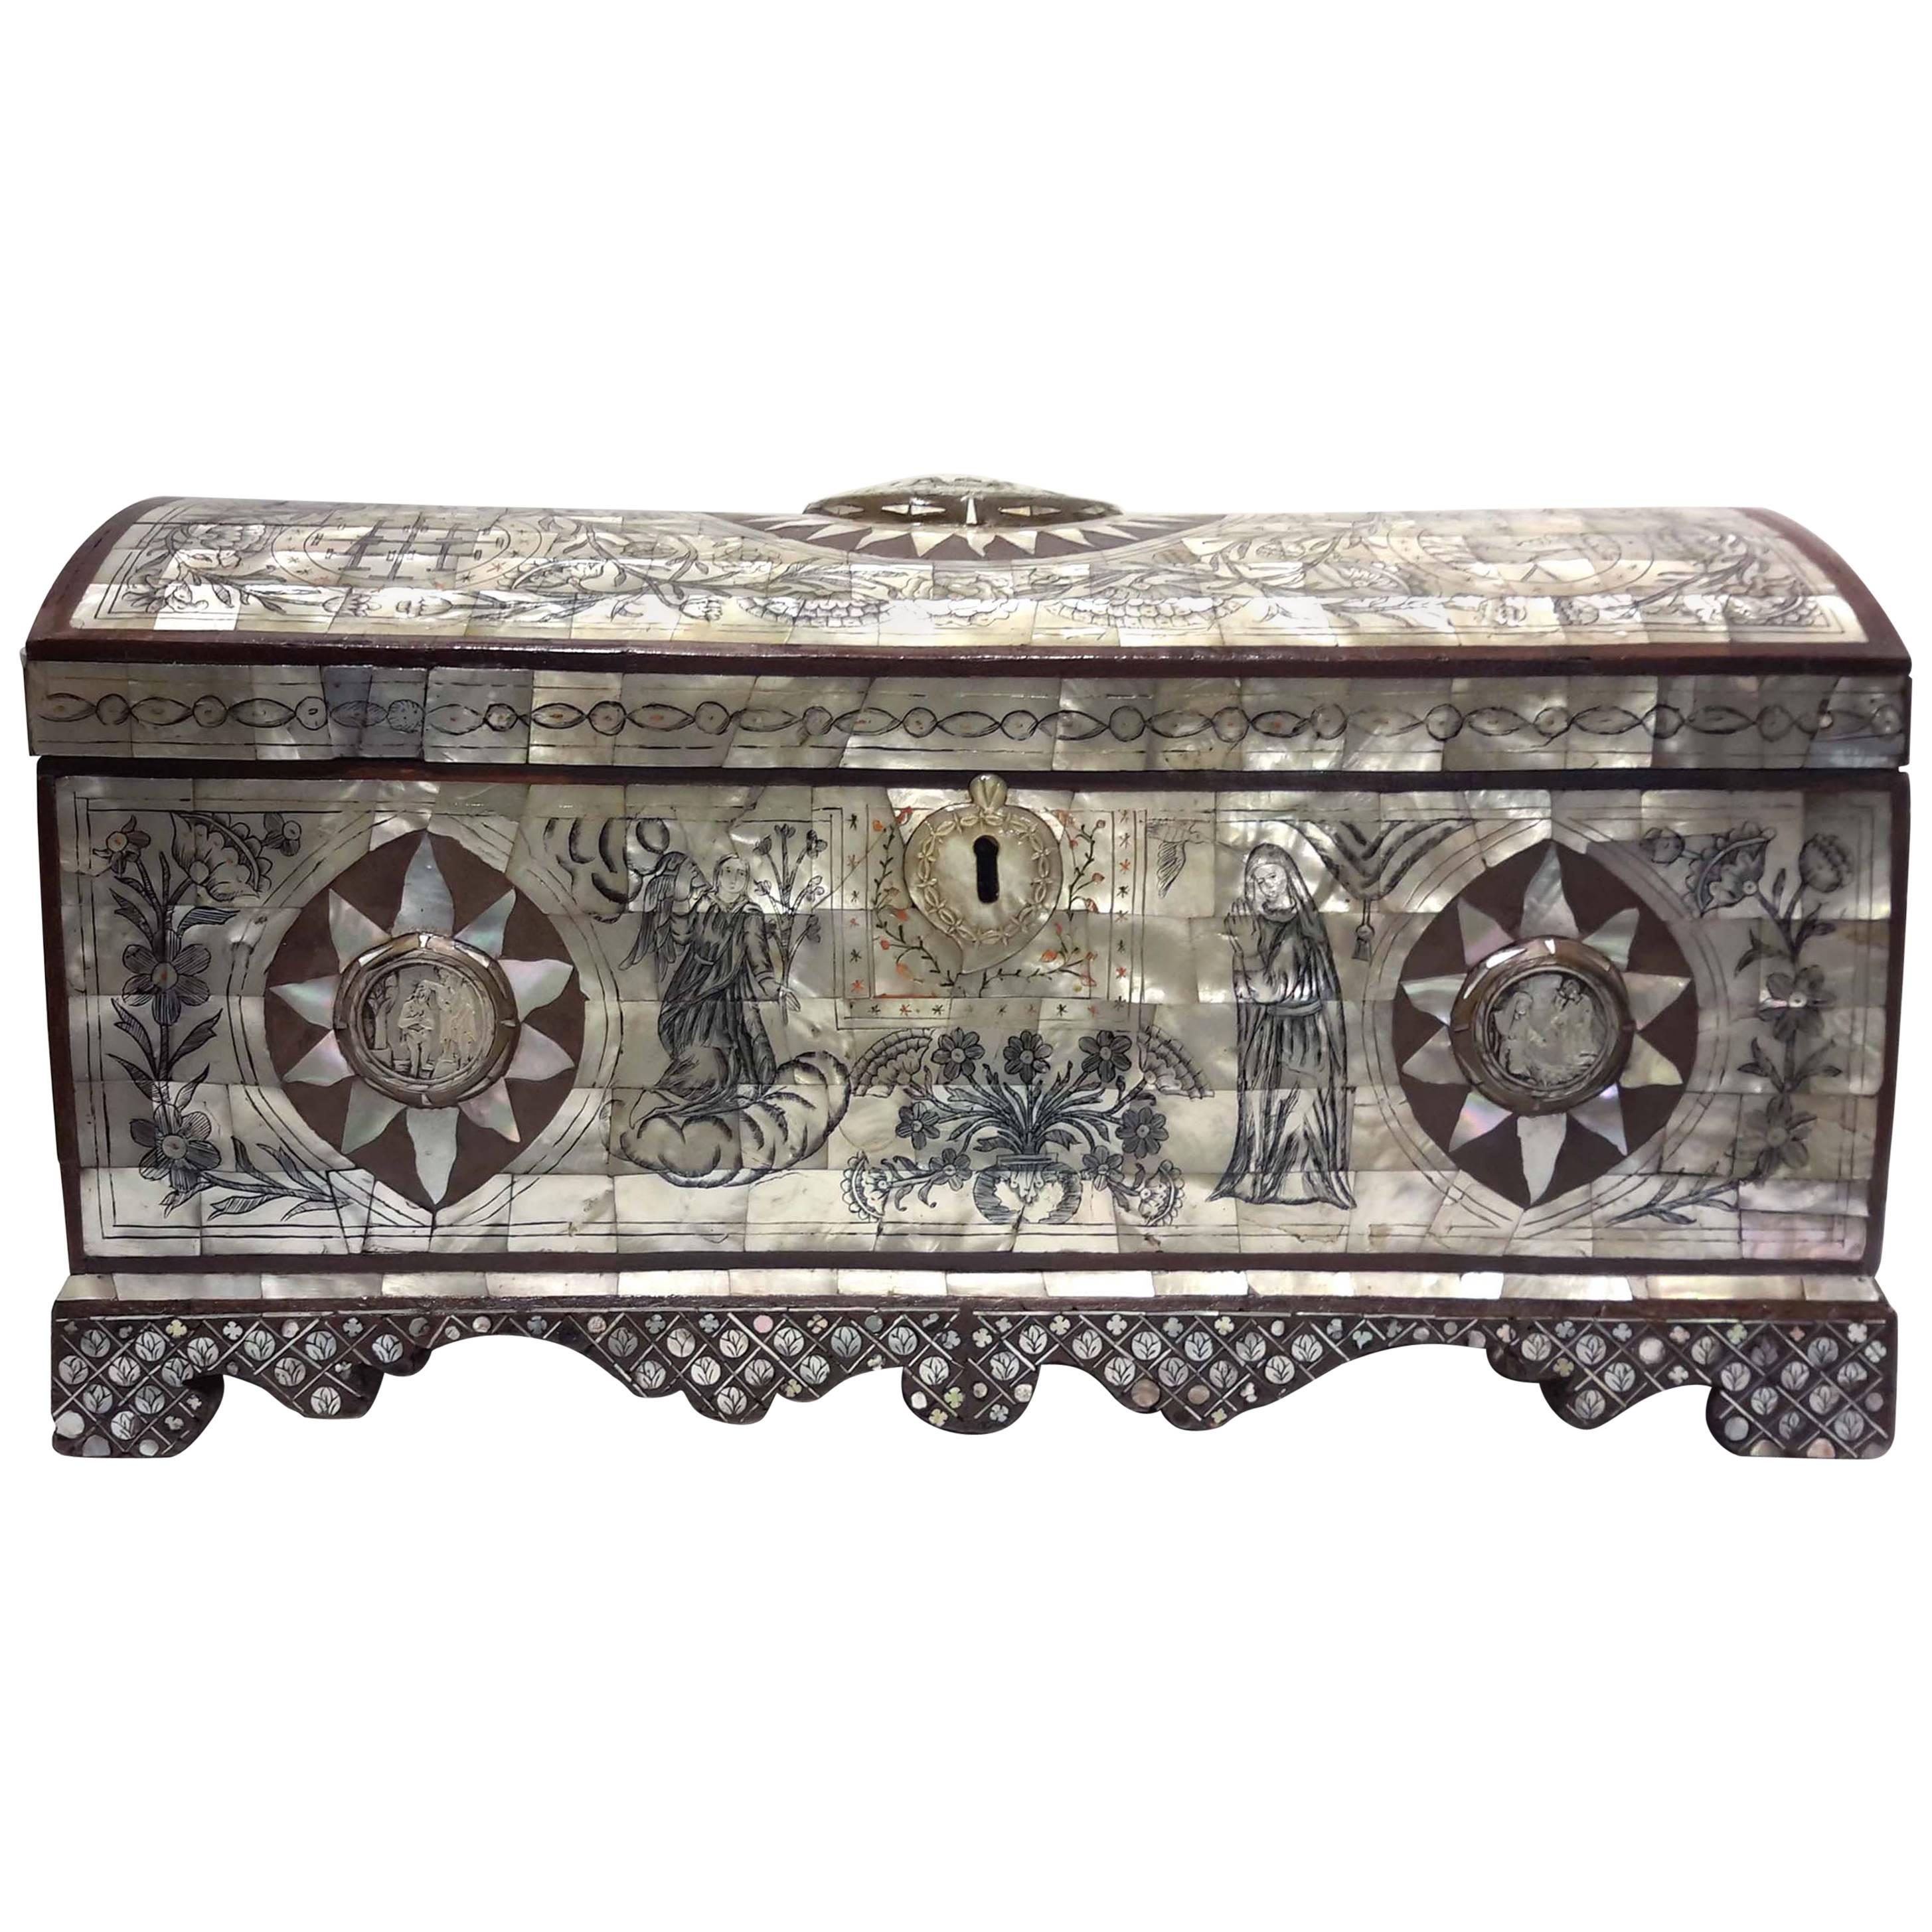 Rare Mother-of-Pearl Decorated Reliquary Coffer, Jerusalem, 18th Century